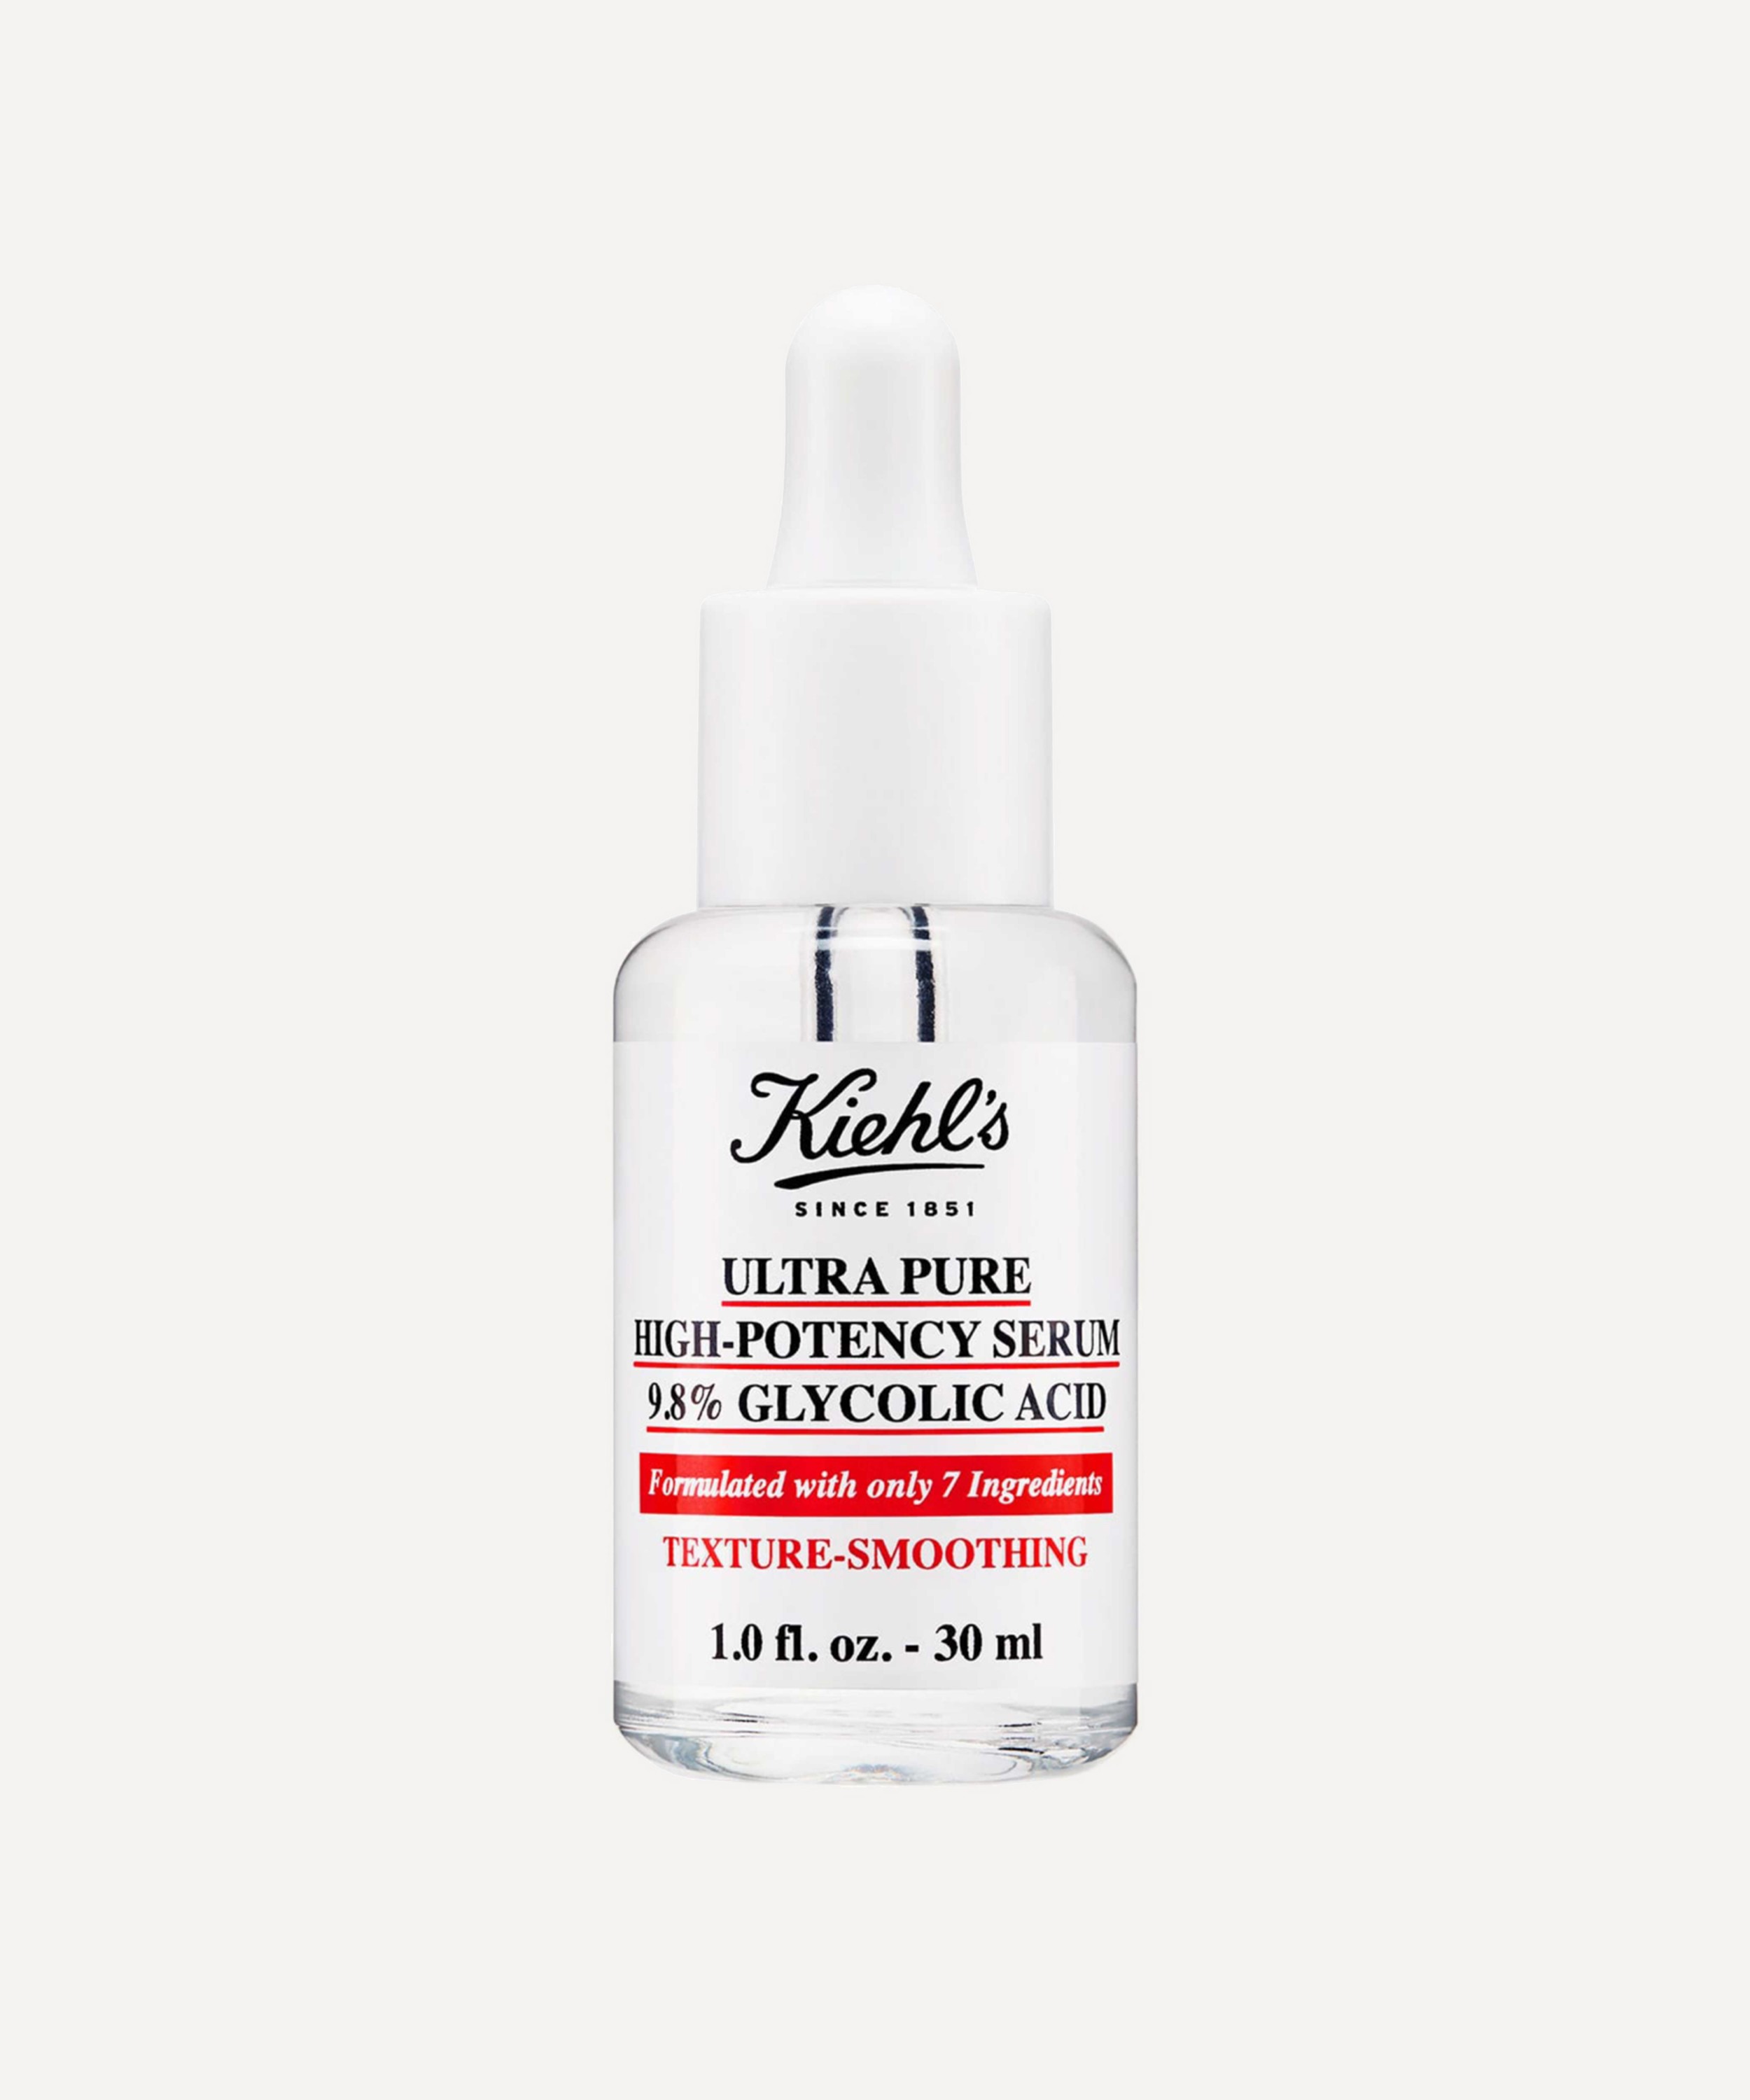 Kiehl's - Ultra Pure High-Potency Serum 9.8% Glycolic Acid 30ml image number 0